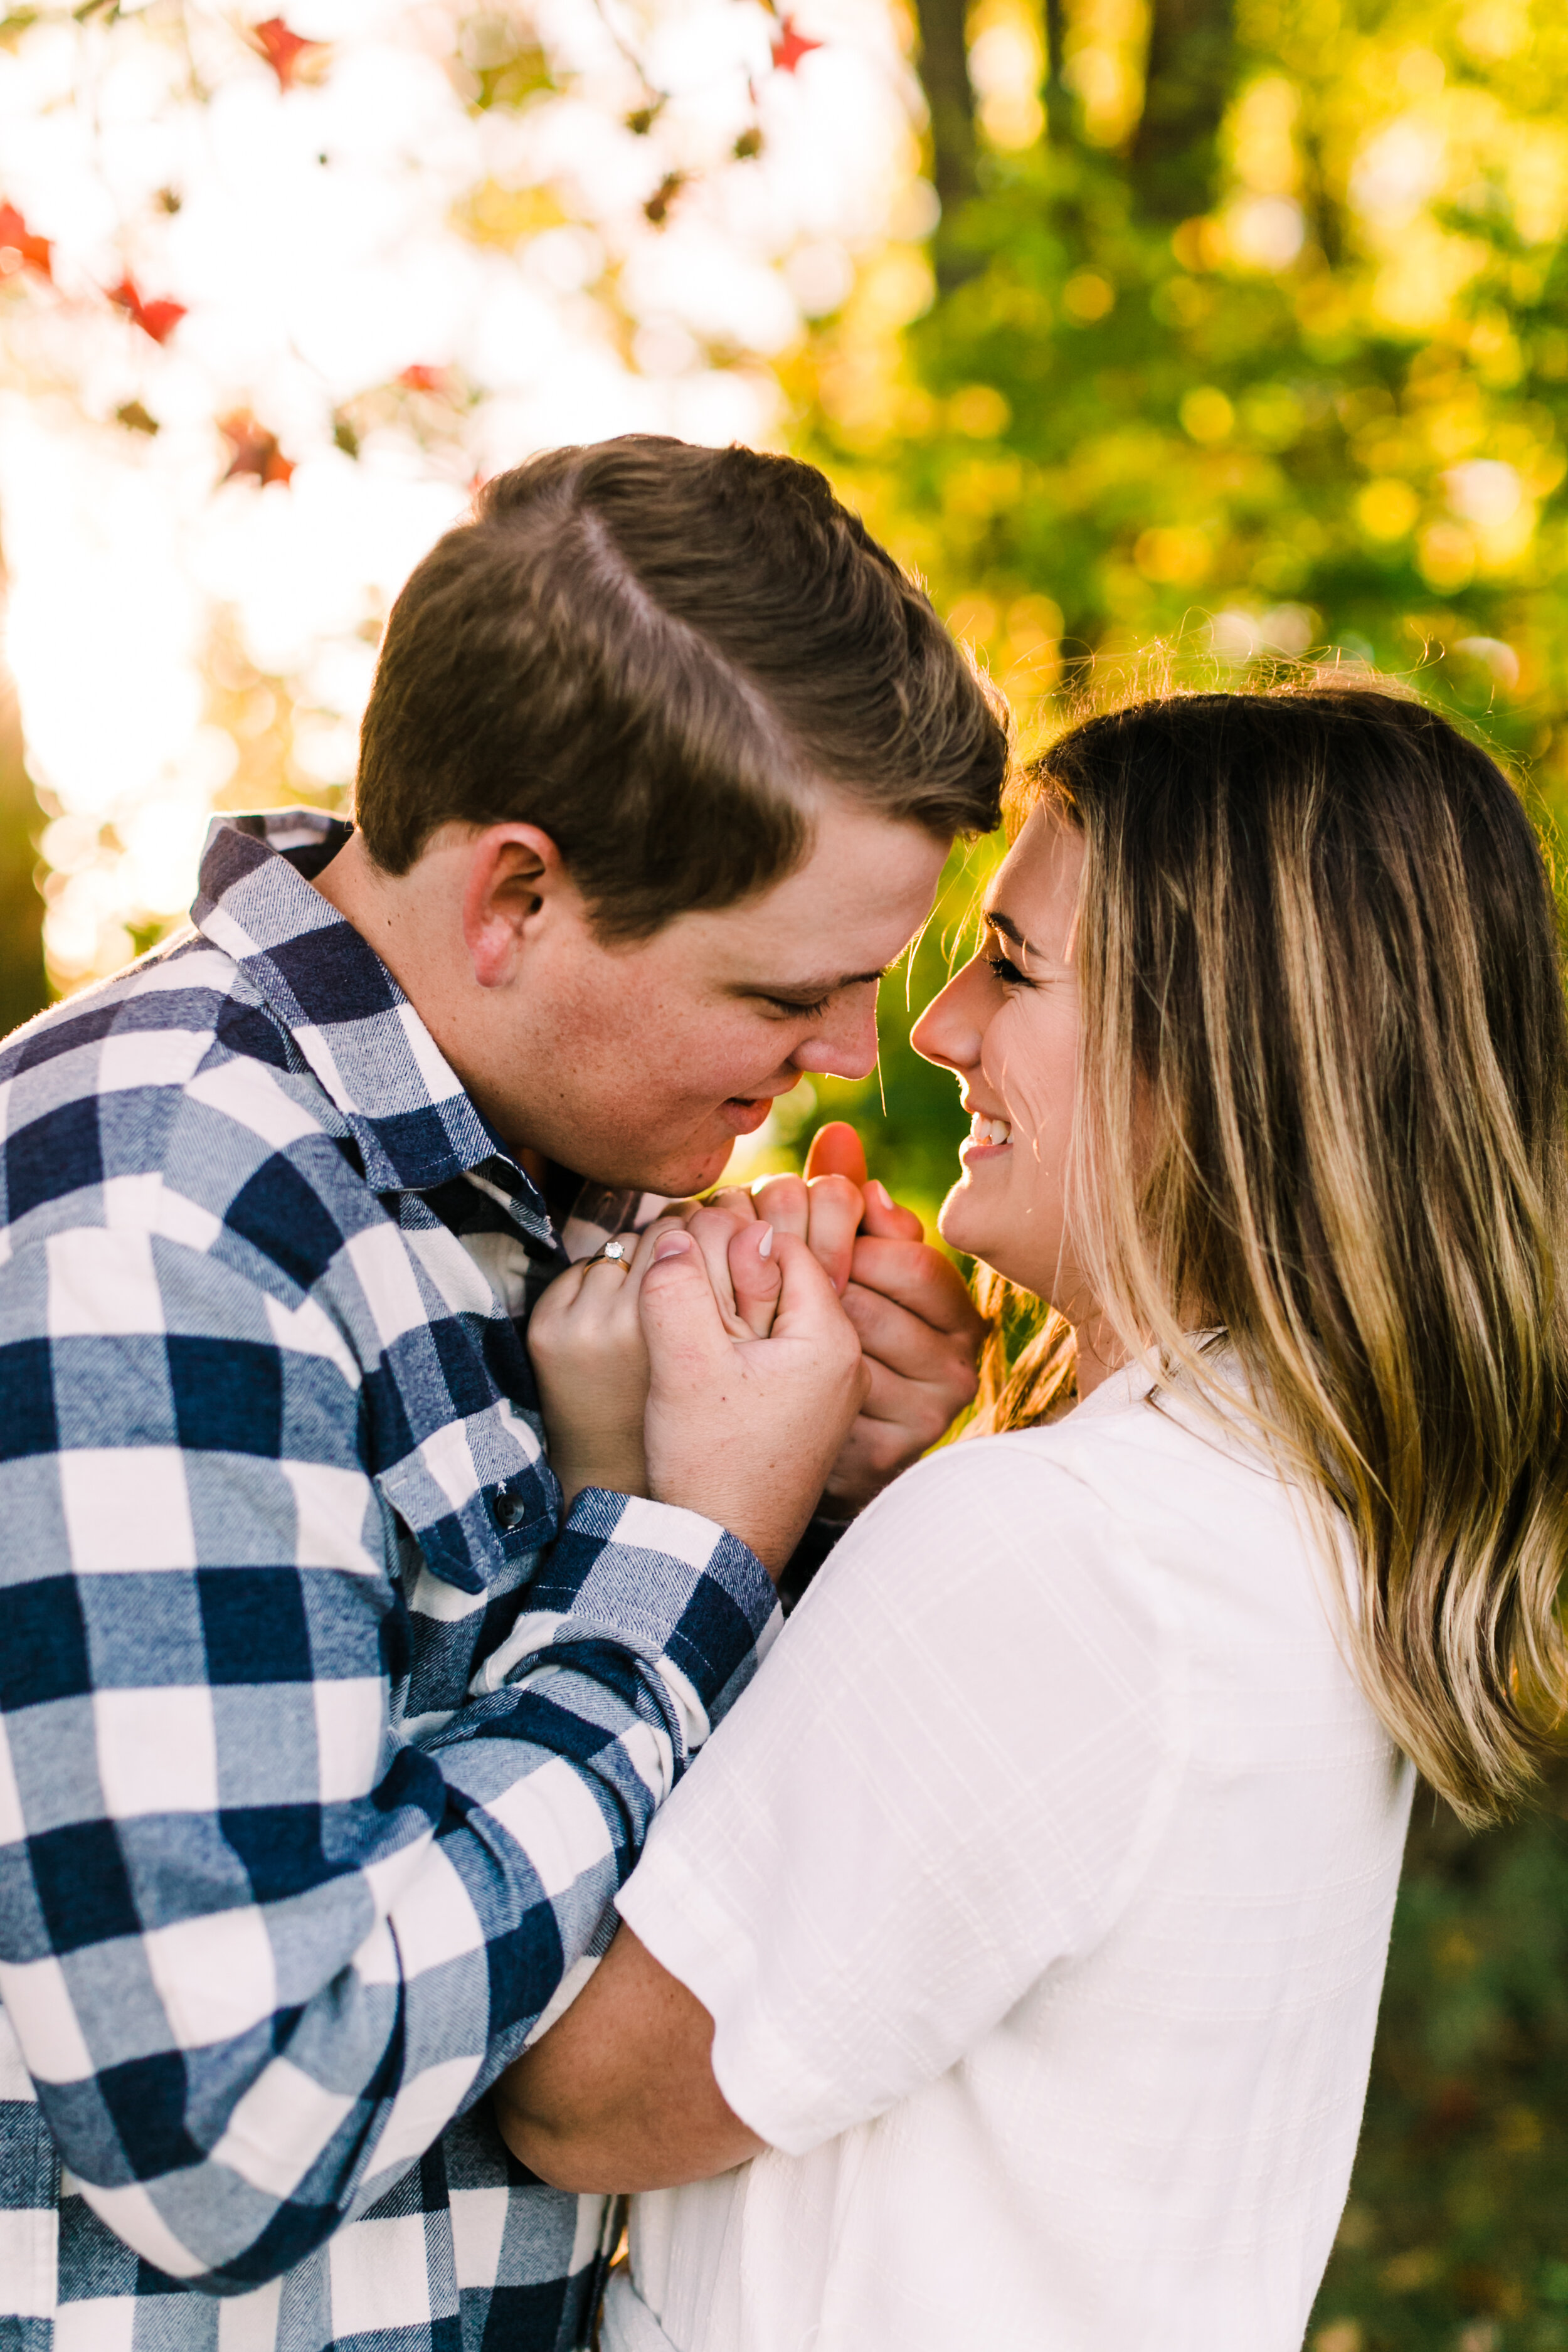 Tennessee+Fall+Engagement+Photos+Puppy (46 of 63).jpg